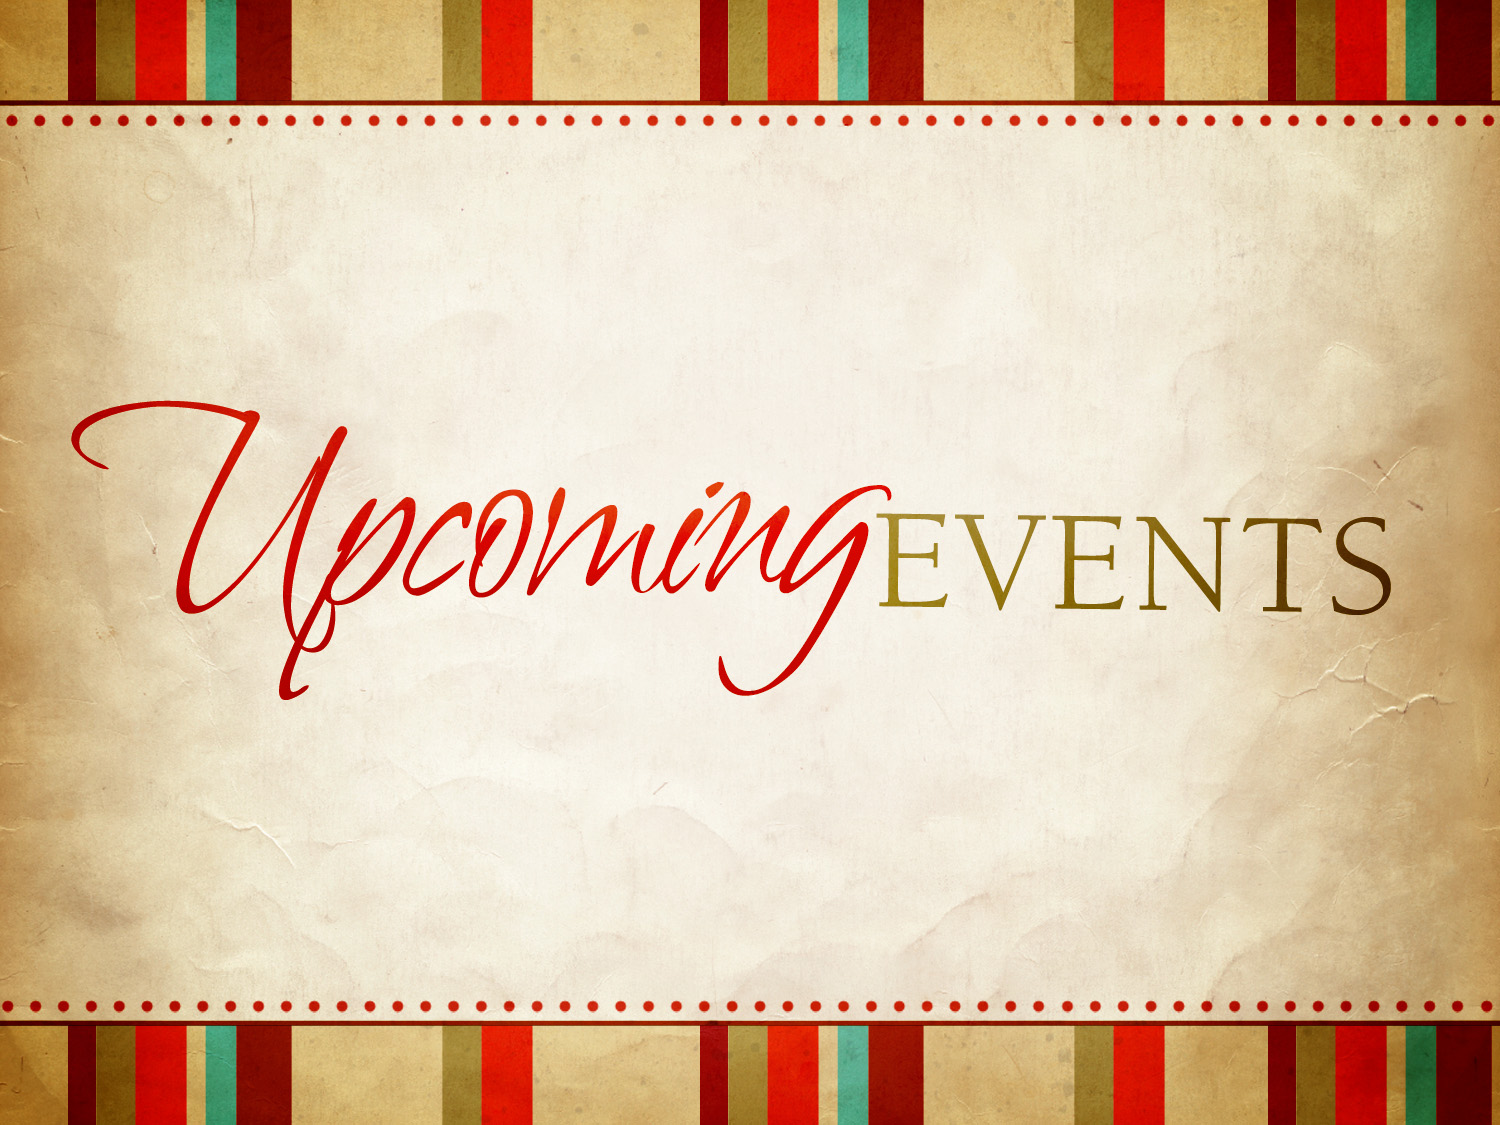 Upcoming Events Images Upcoming Events Upcoming Church Events And News